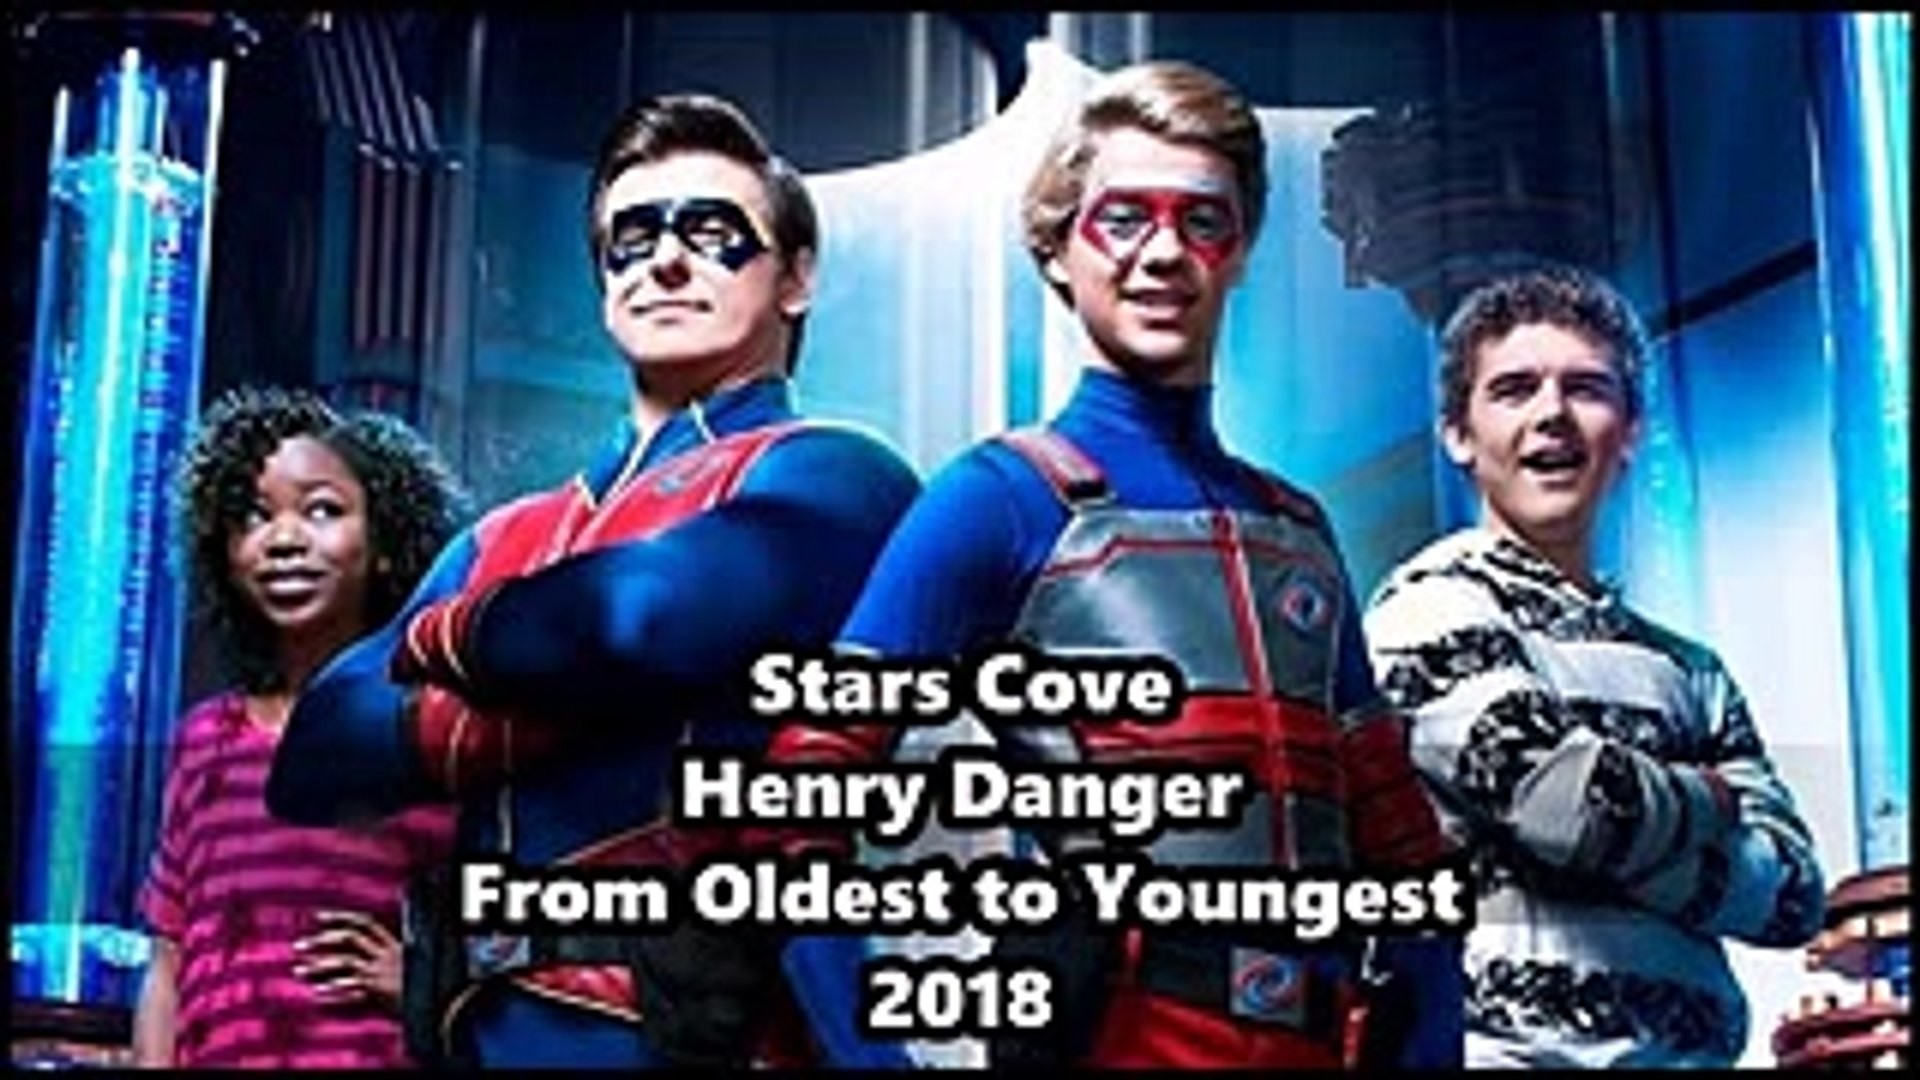 About Capt Henry and Danger Force Wallpaper New Google Play version    Apptopia